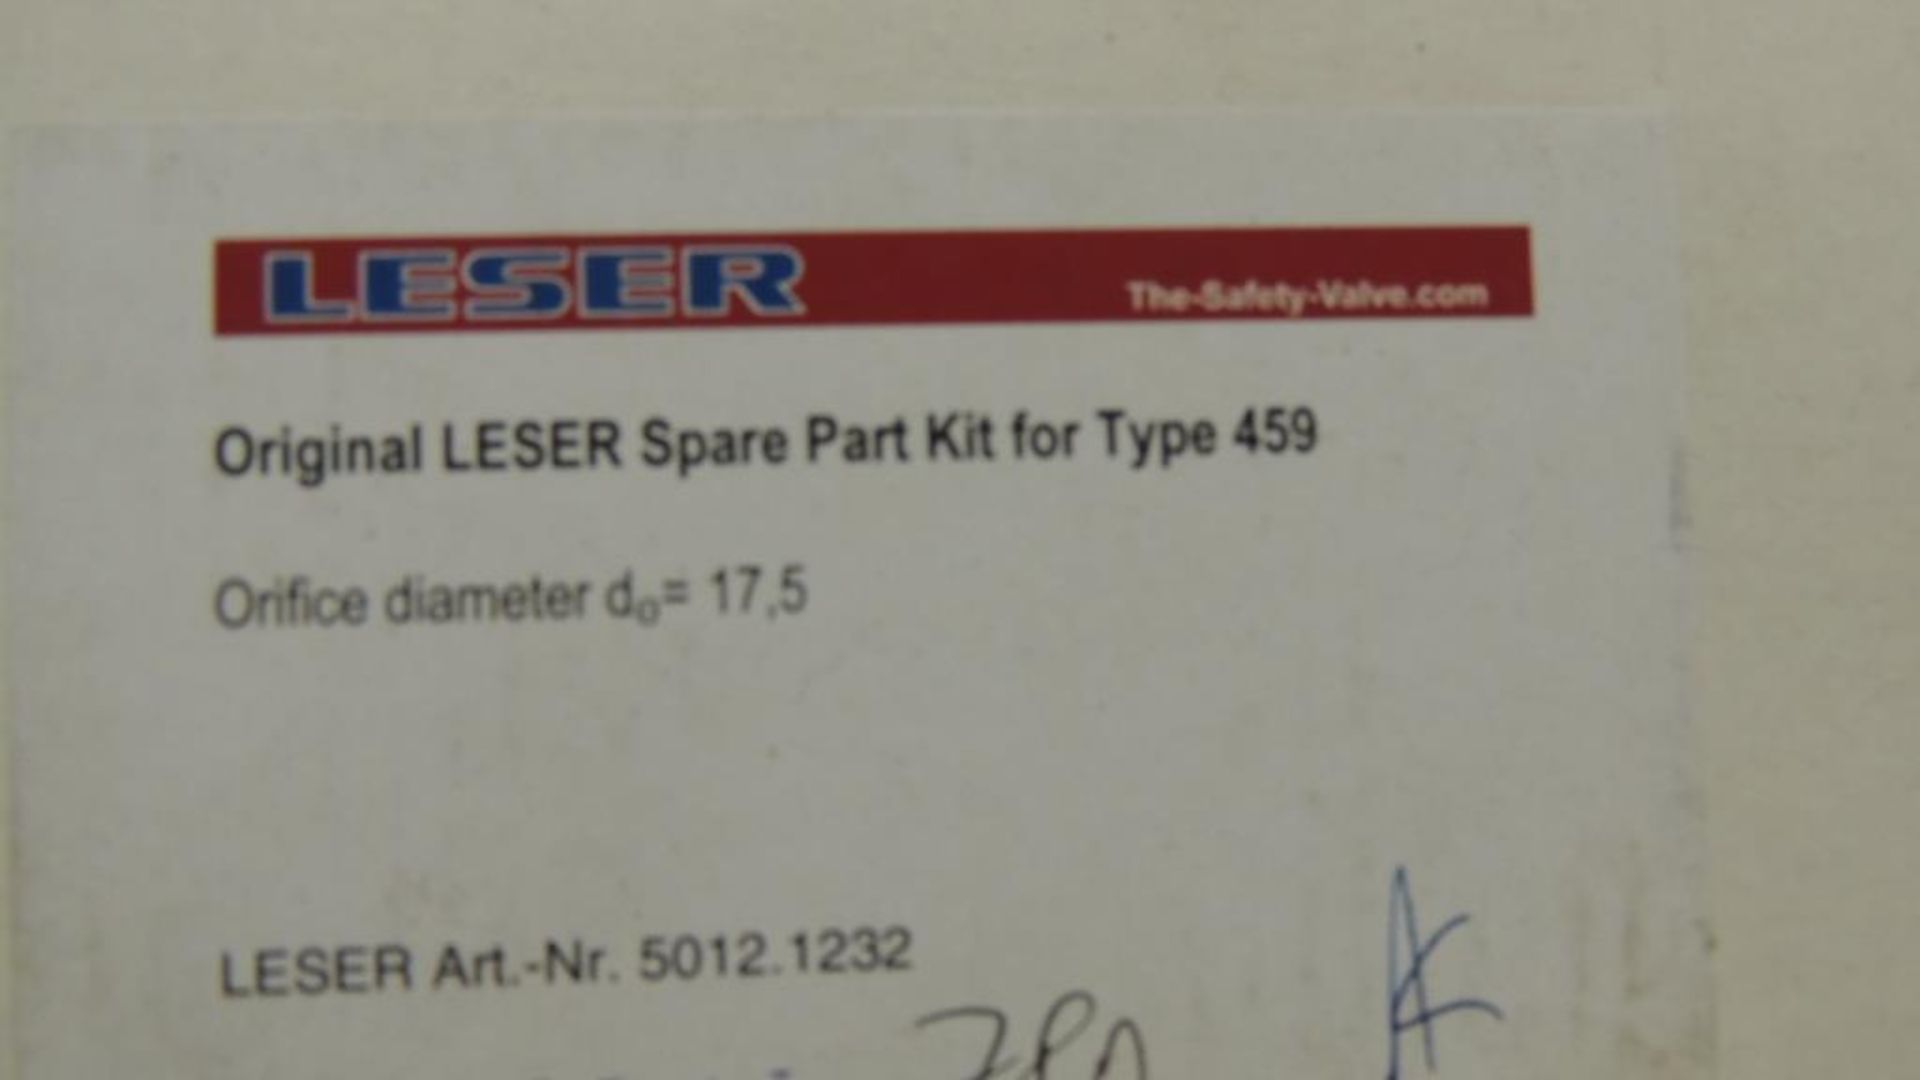 Large Quantity of Leser Relief and Safety Valves, plus Spare Parts Kits - Image 29 of 374